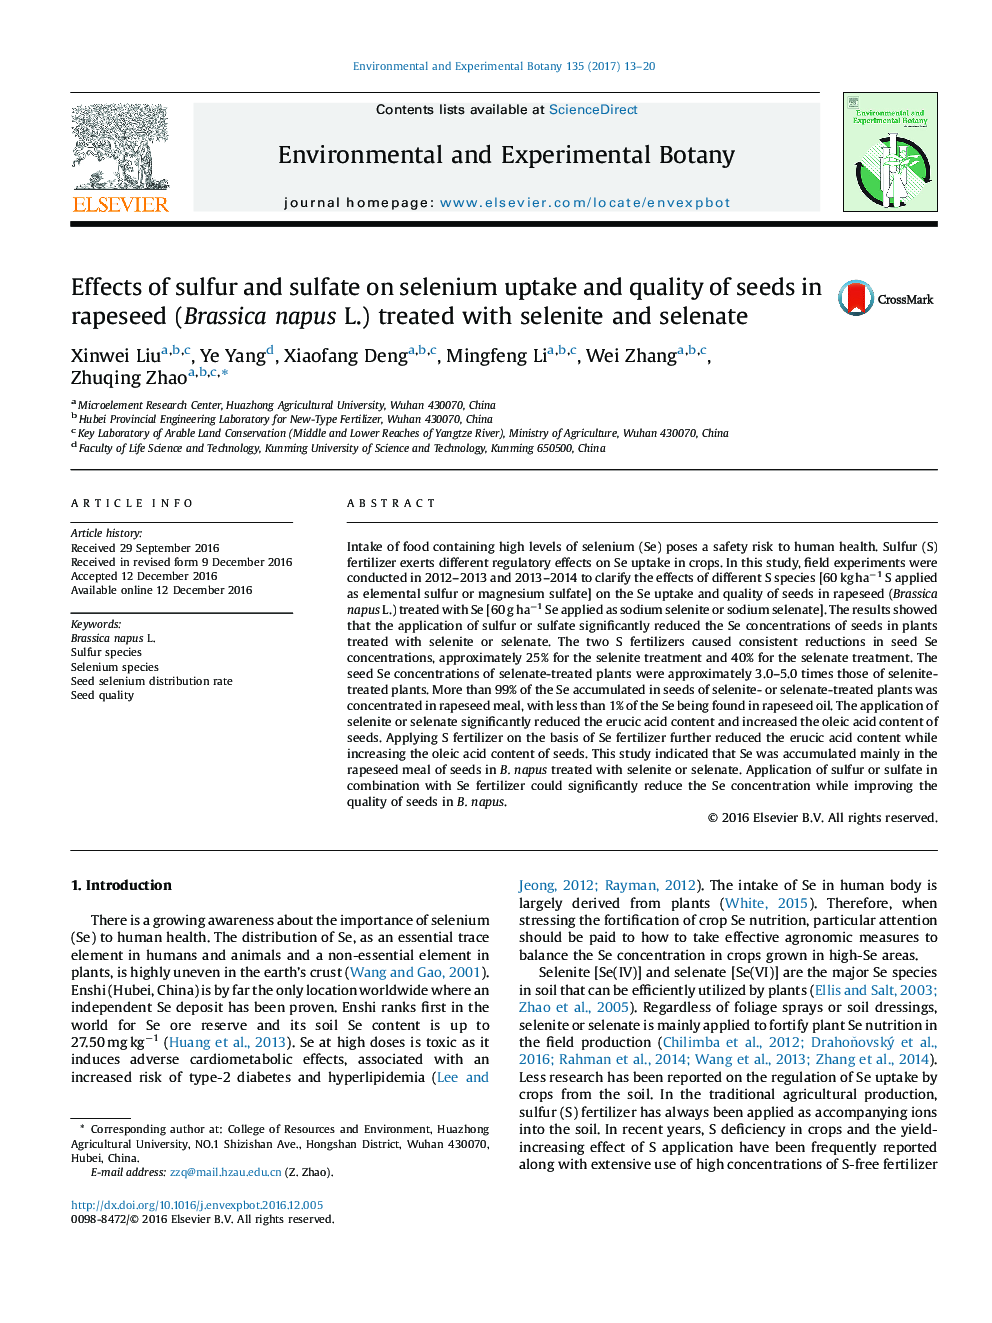 Effects of sulfur and sulfate on selenium uptake and quality of seeds in rapeseed (Brassica napus L.) treated with selenite and selenate